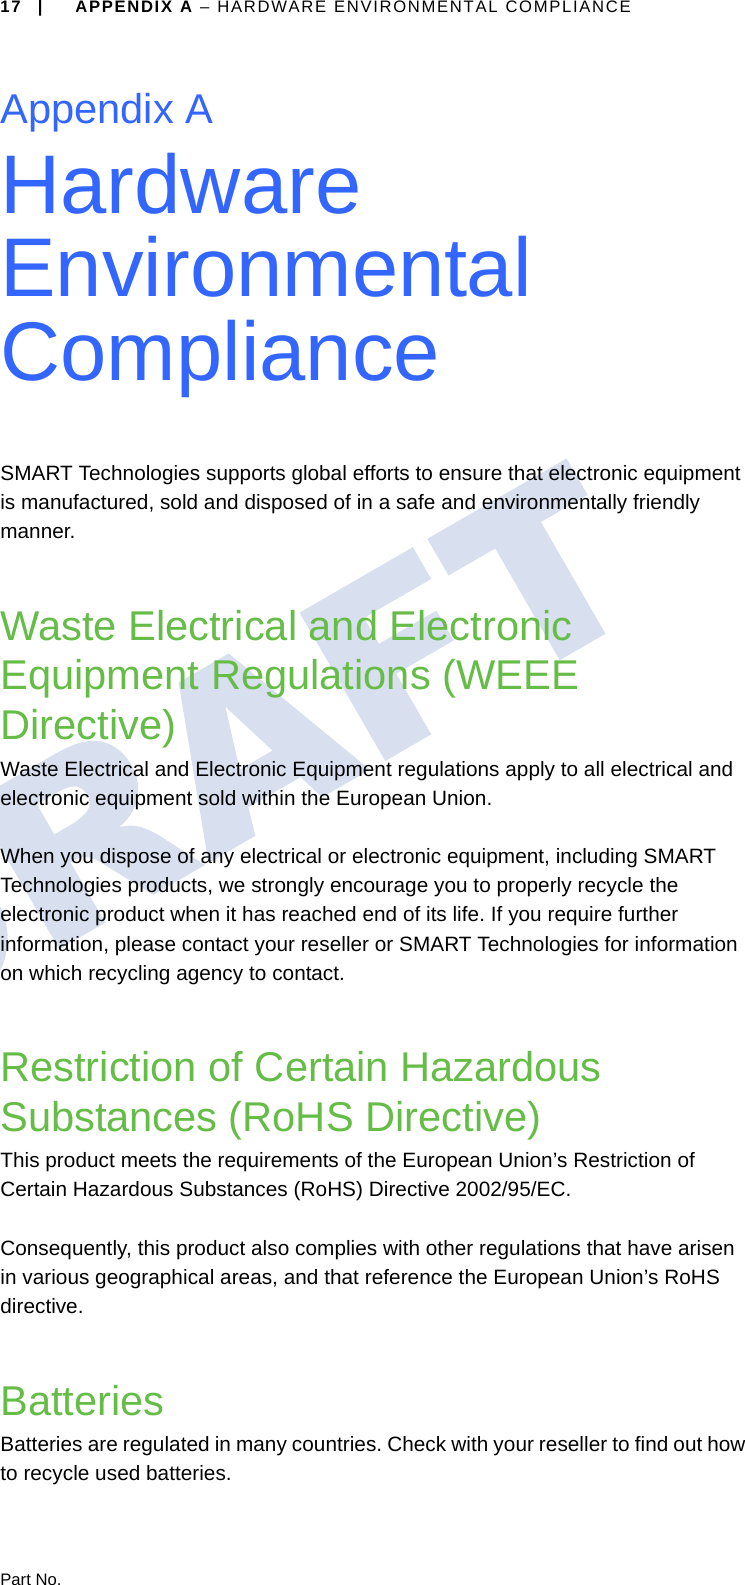 Part No.17 | APPENDIX A – HARDWARE ENVIRONMENTAL COMPLIANCEAppendix AHardware Environmental ComplianceSMART Technologies supports global efforts to ensure that electronic equipment is manufactured, sold and disposed of in a safe and environmentally friendly manner.Waste Electrical and Electronic Equipment Regulations (WEEE Directive)Waste Electrical and Electronic Equipment regulations apply to all electrical and electronic equipment sold within the European Union.When you dispose of any electrical or electronic equipment, including SMART Technologies products, we strongly encourage you to properly recycle the electronic product when it has reached end of its life. If you require further information, please contact your reseller or SMART Technologies for information on which recycling agency to contact.Restriction of Certain Hazardous Substances (RoHS Directive)This product meets the requirements of the European Union’s Restriction of Certain Hazardous Substances (RoHS) Directive 2002/95/EC.Consequently, this product also complies with other regulations that have arisen in various geographical areas, and that reference the European Union’s RoHS directive.BatteriesBatteries are regulated in many countries. Check with your reseller to find out how to recycle used batteries.